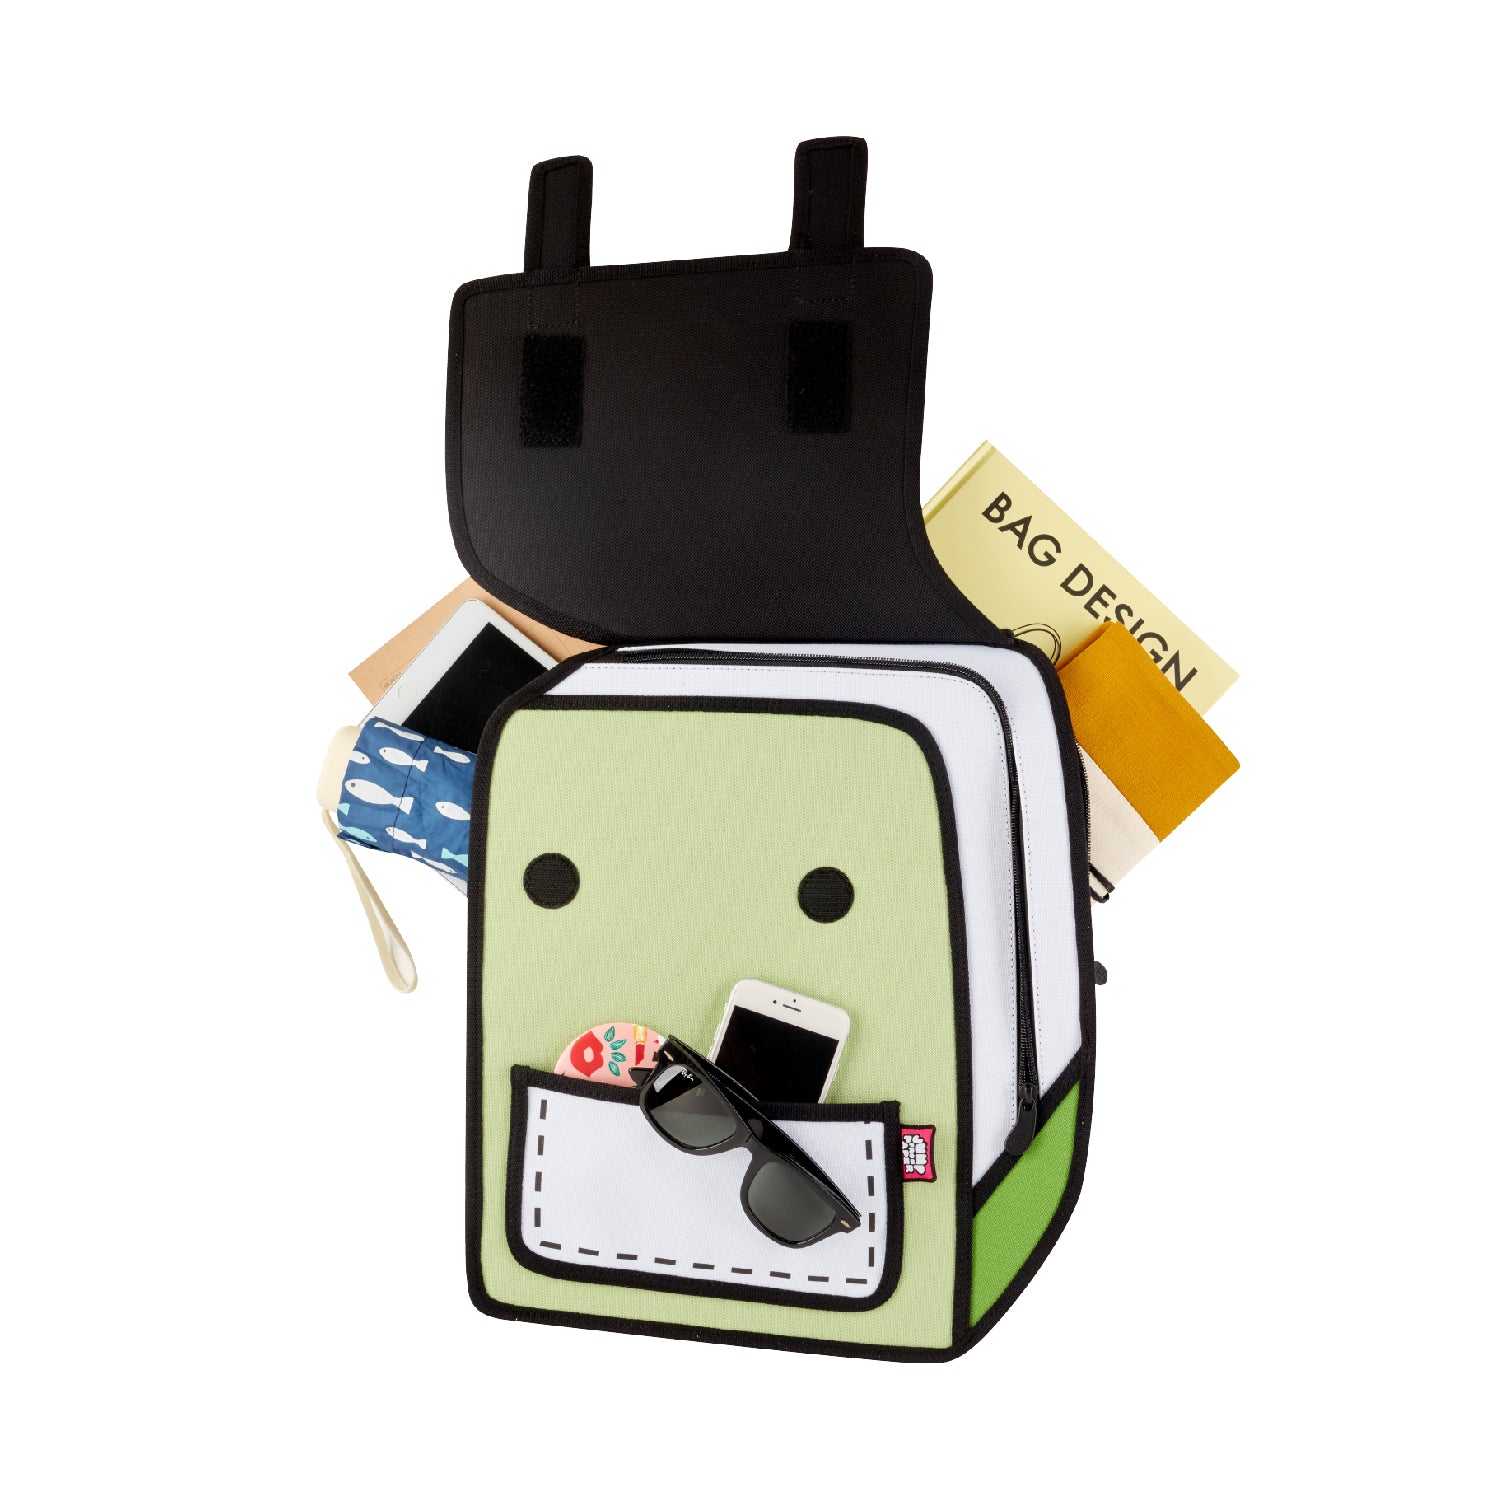 Greenery Spaceman Backpack - JumpFromPaper